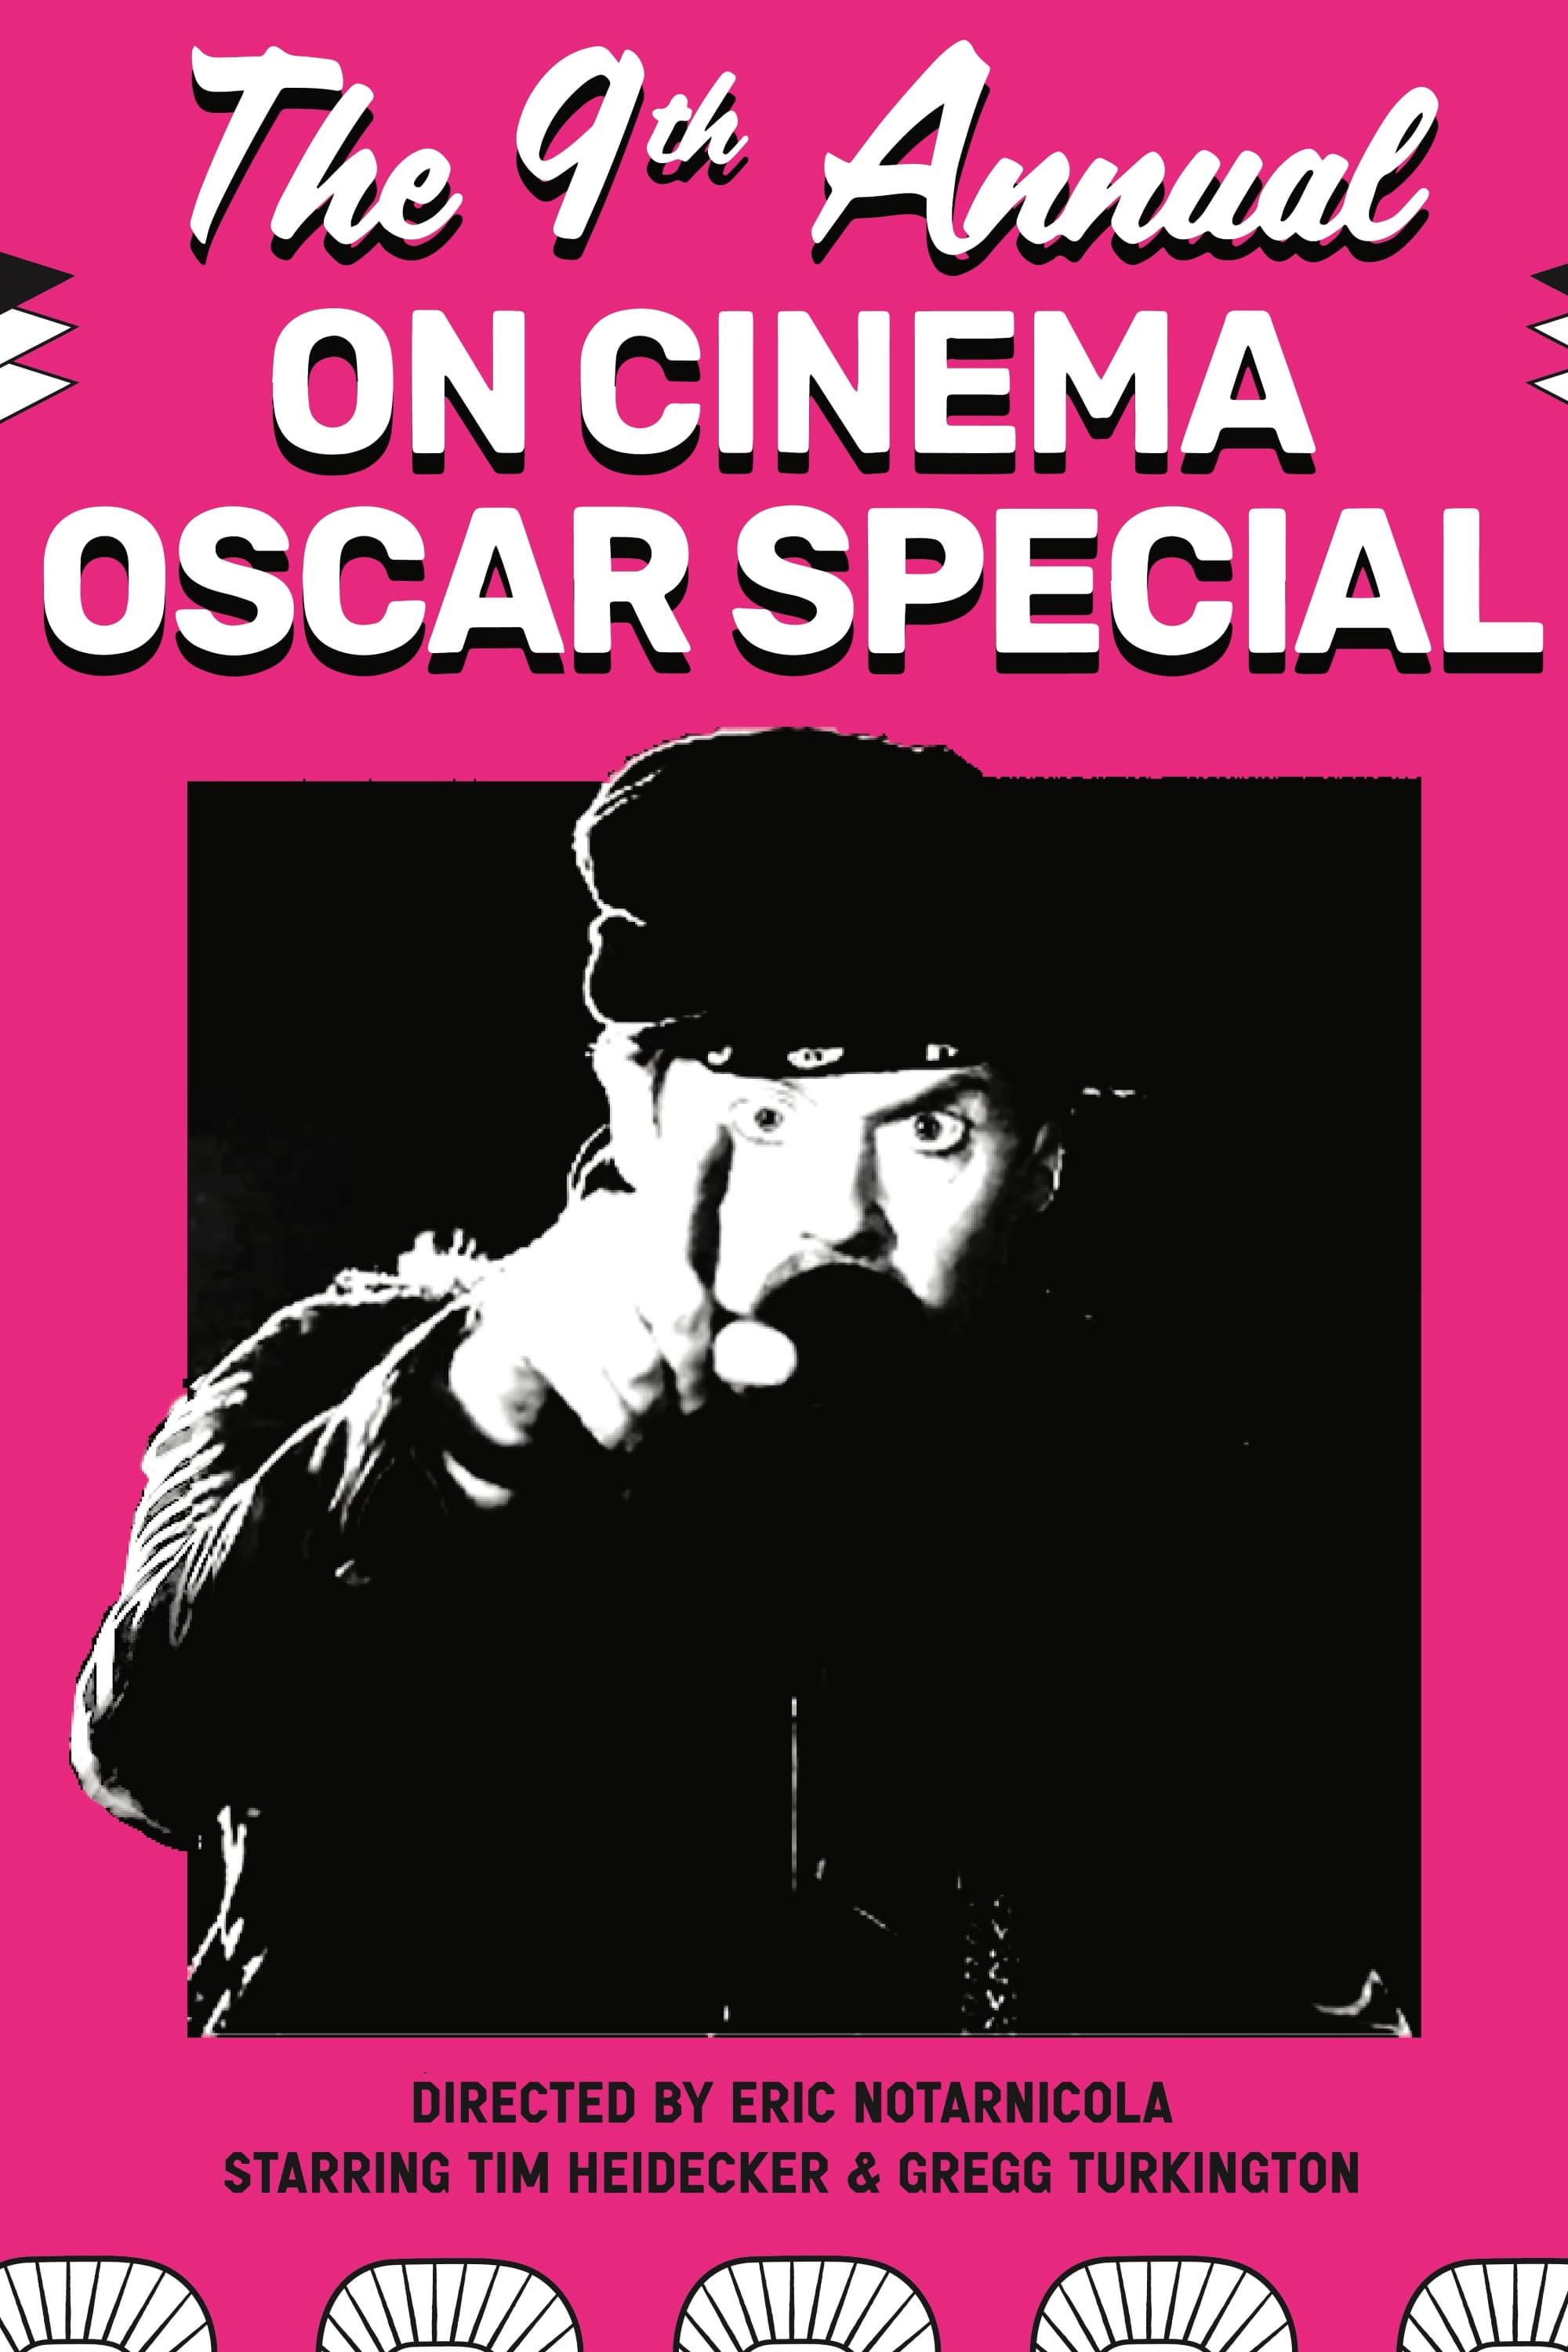 The 9th Annual On Cinema Oscar Special poster